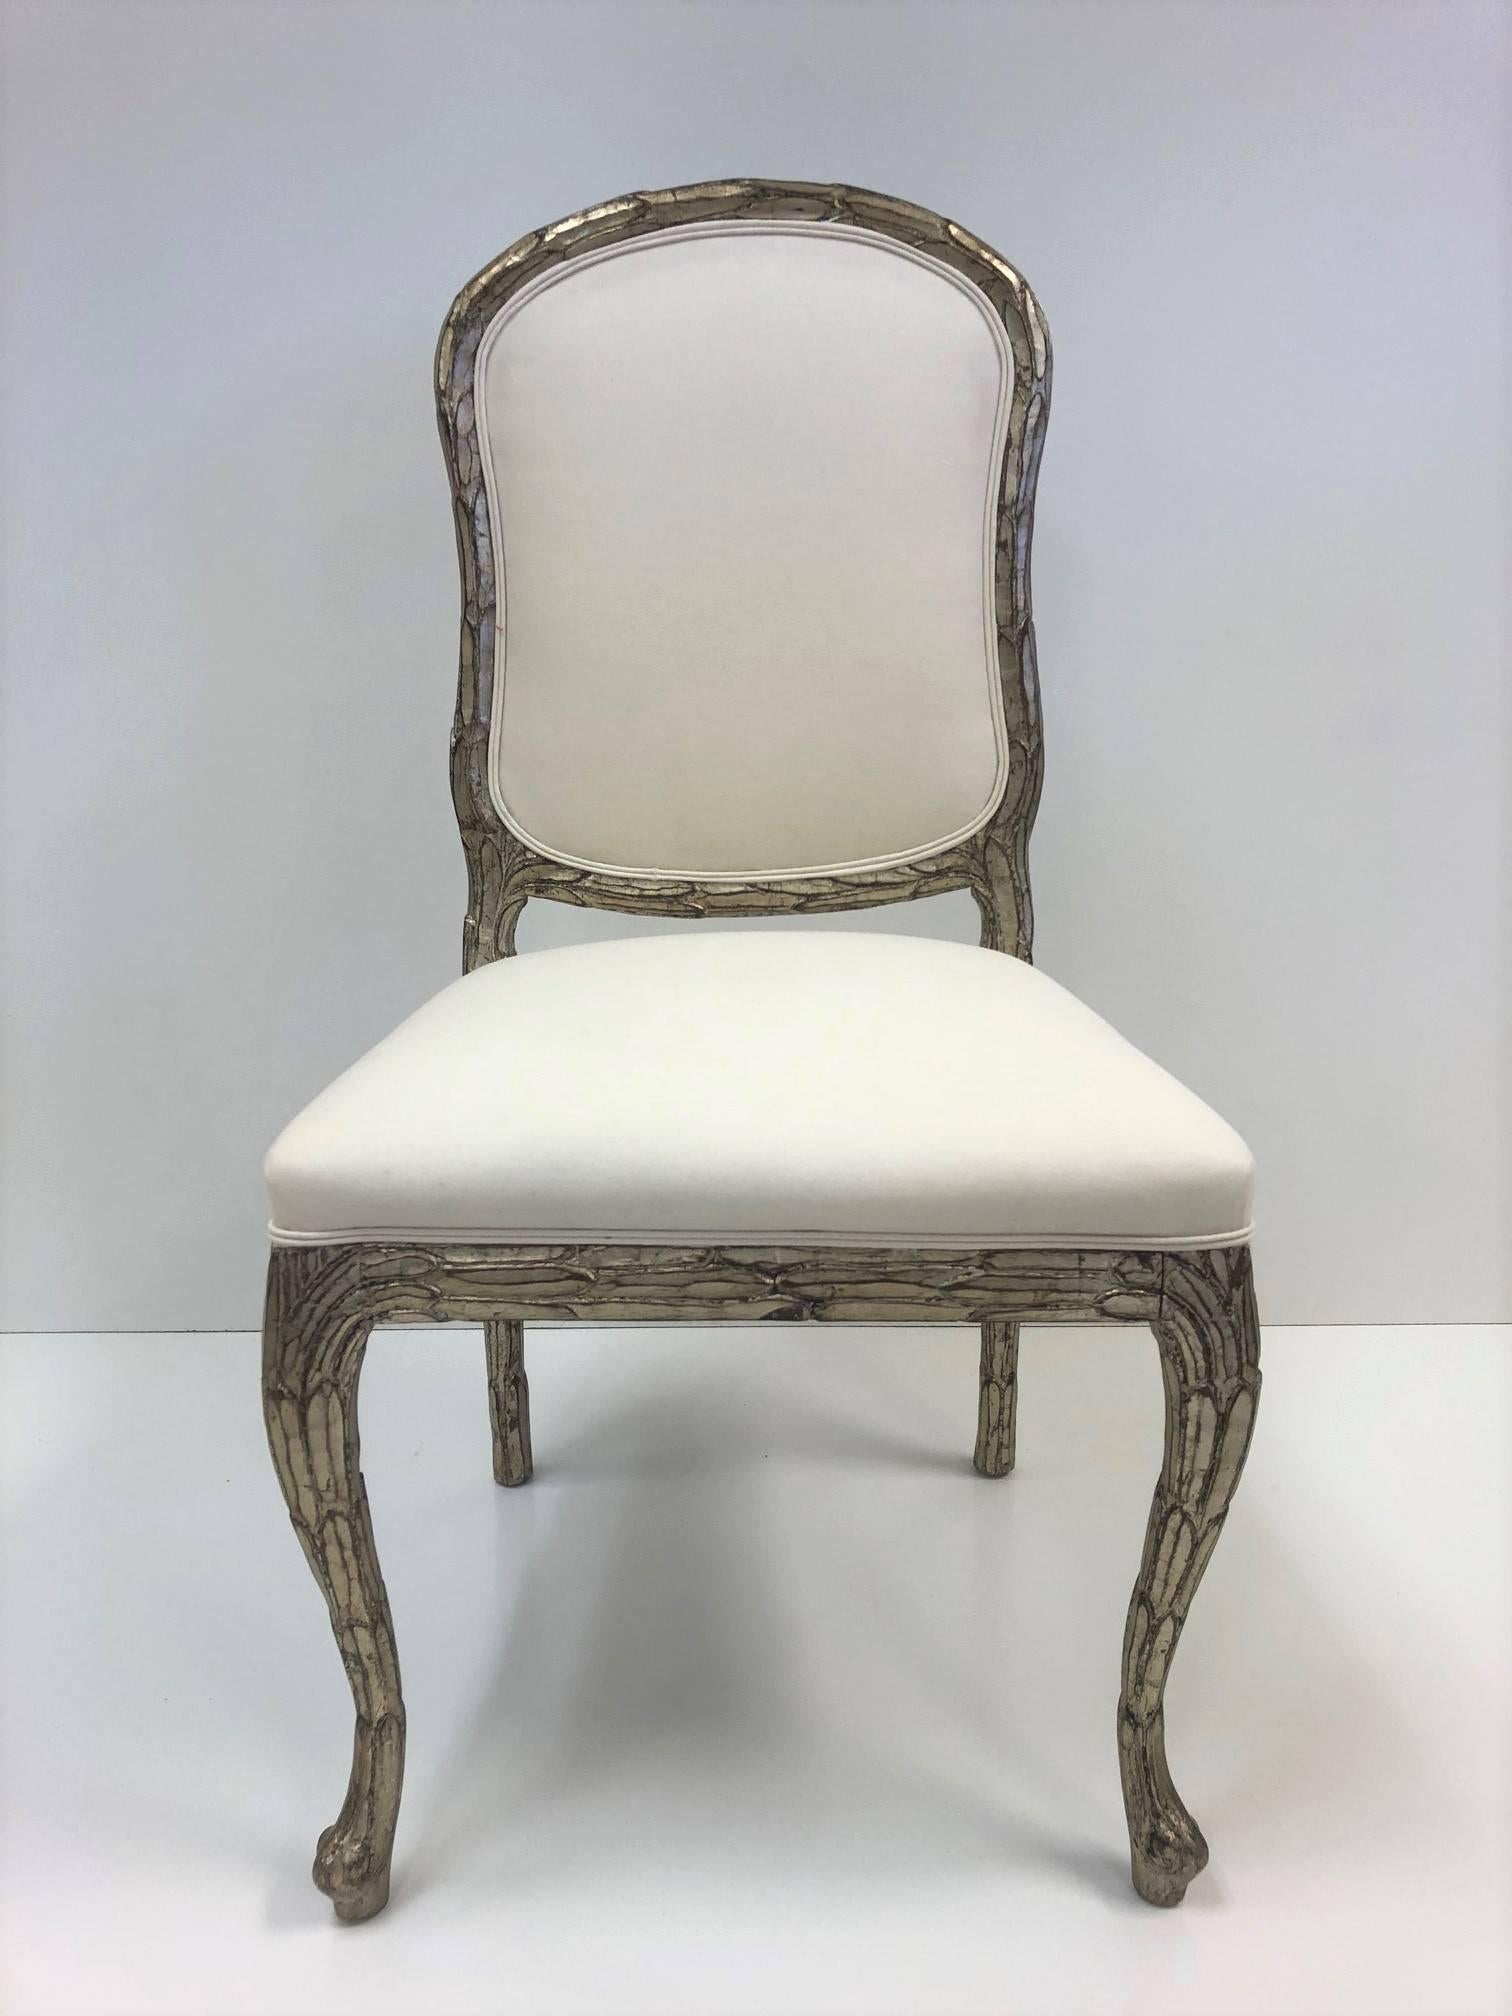 Set of 10 Louis XIV Style Dining Chairs.  The chairs are upholstered in muslin with silver leaf carved wood frame. 
Arms: 40.25H x 23.5W x 224D.  Arm height: 27.5H.  Seat height: 19H
Without Arms:  38.25H x 19.5W x 20.5D. 